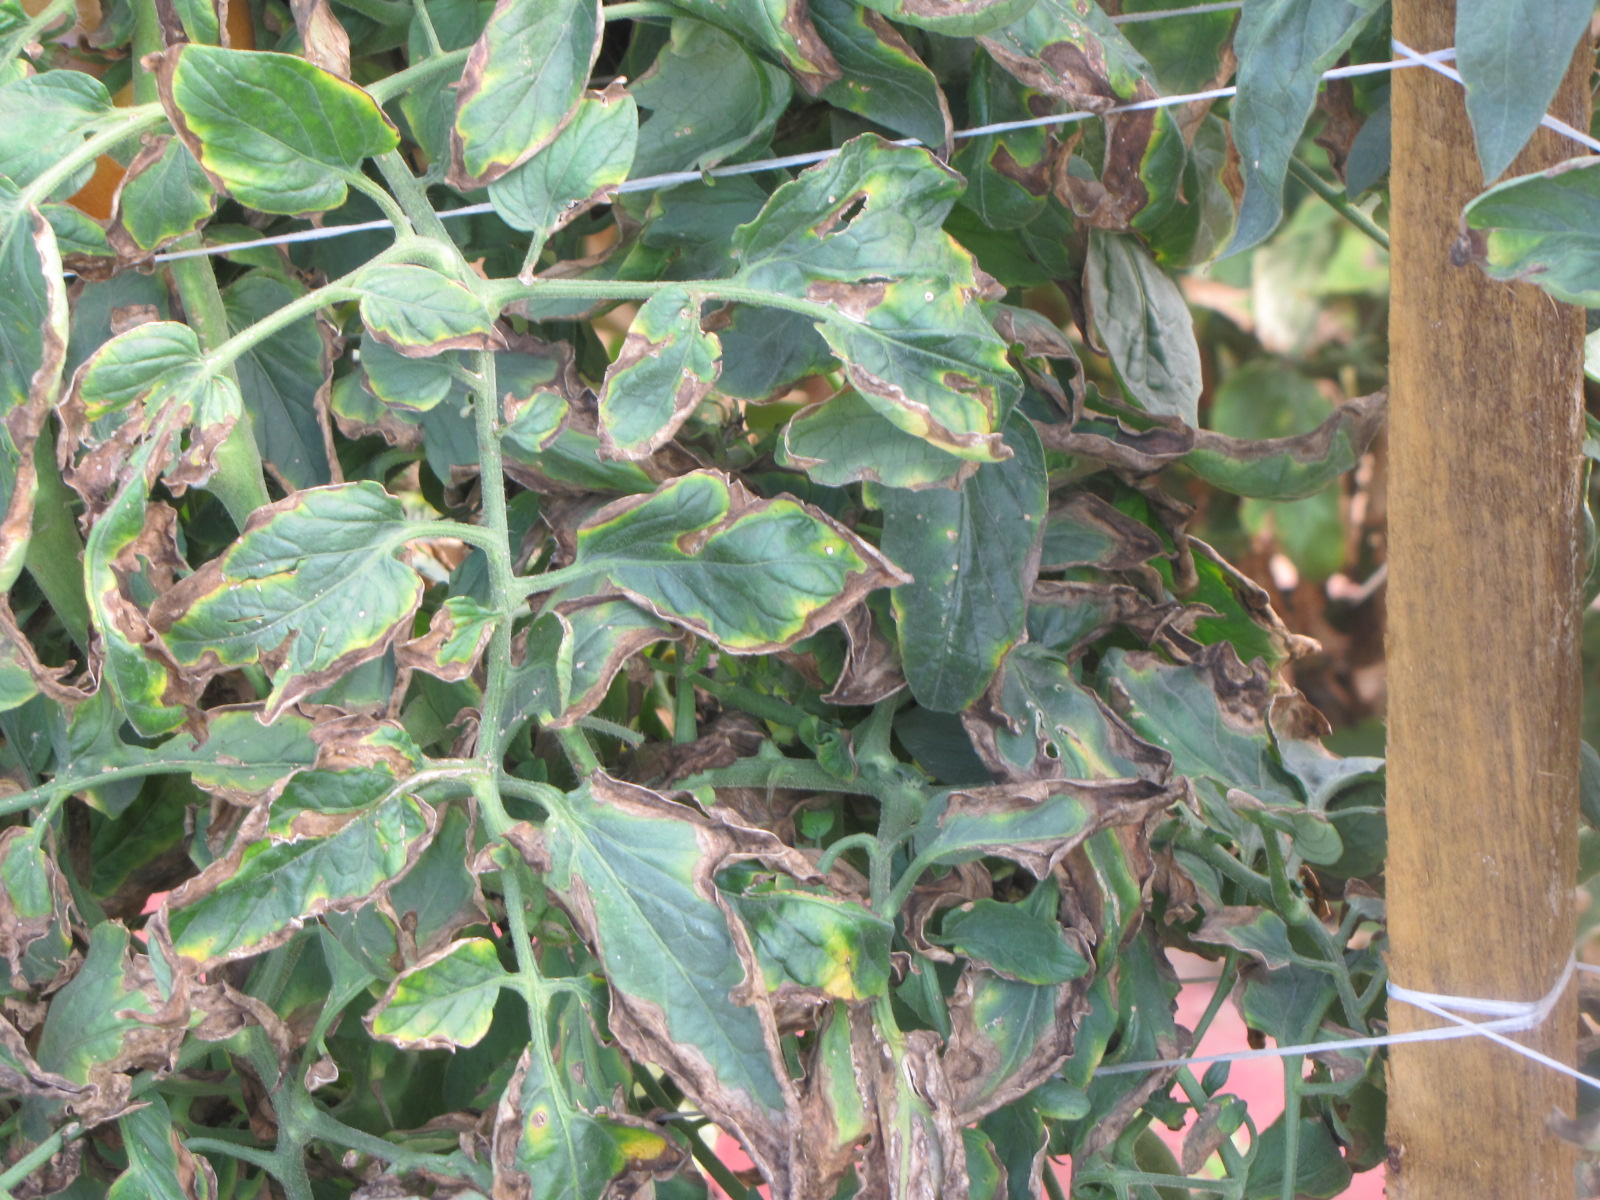   Necrosis and chlorosis on leaf margin, also known and ‘firing’ due to bacterial canker. This is a very common symptom.